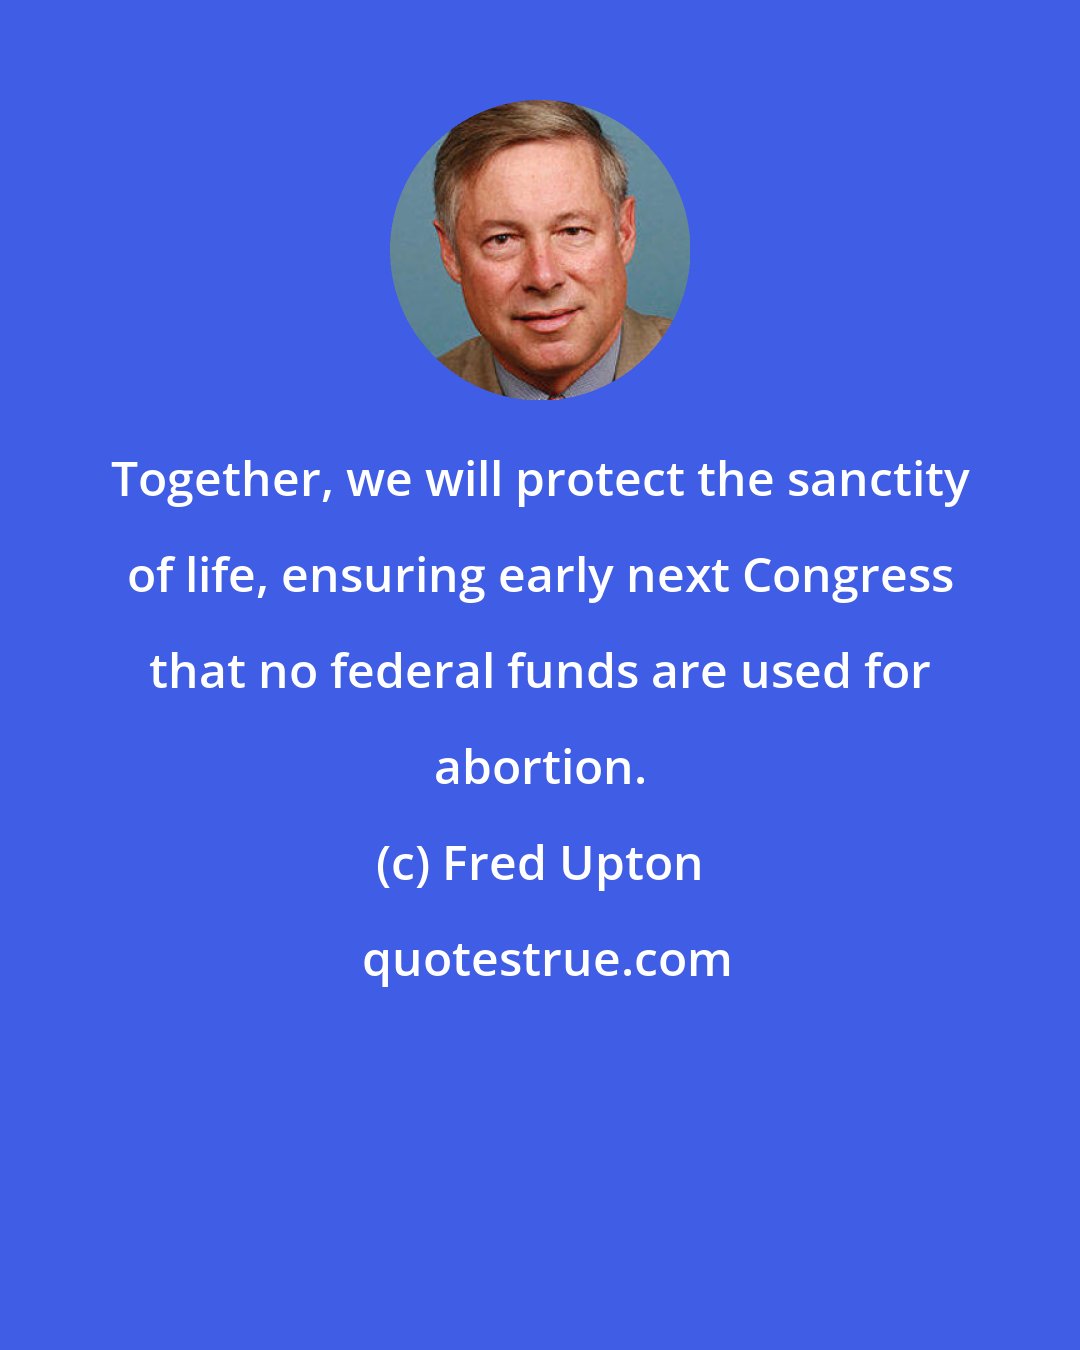 Fred Upton: Together, we will protect the sanctity of life, ensuring early next Congress that no federal funds are used for abortion.